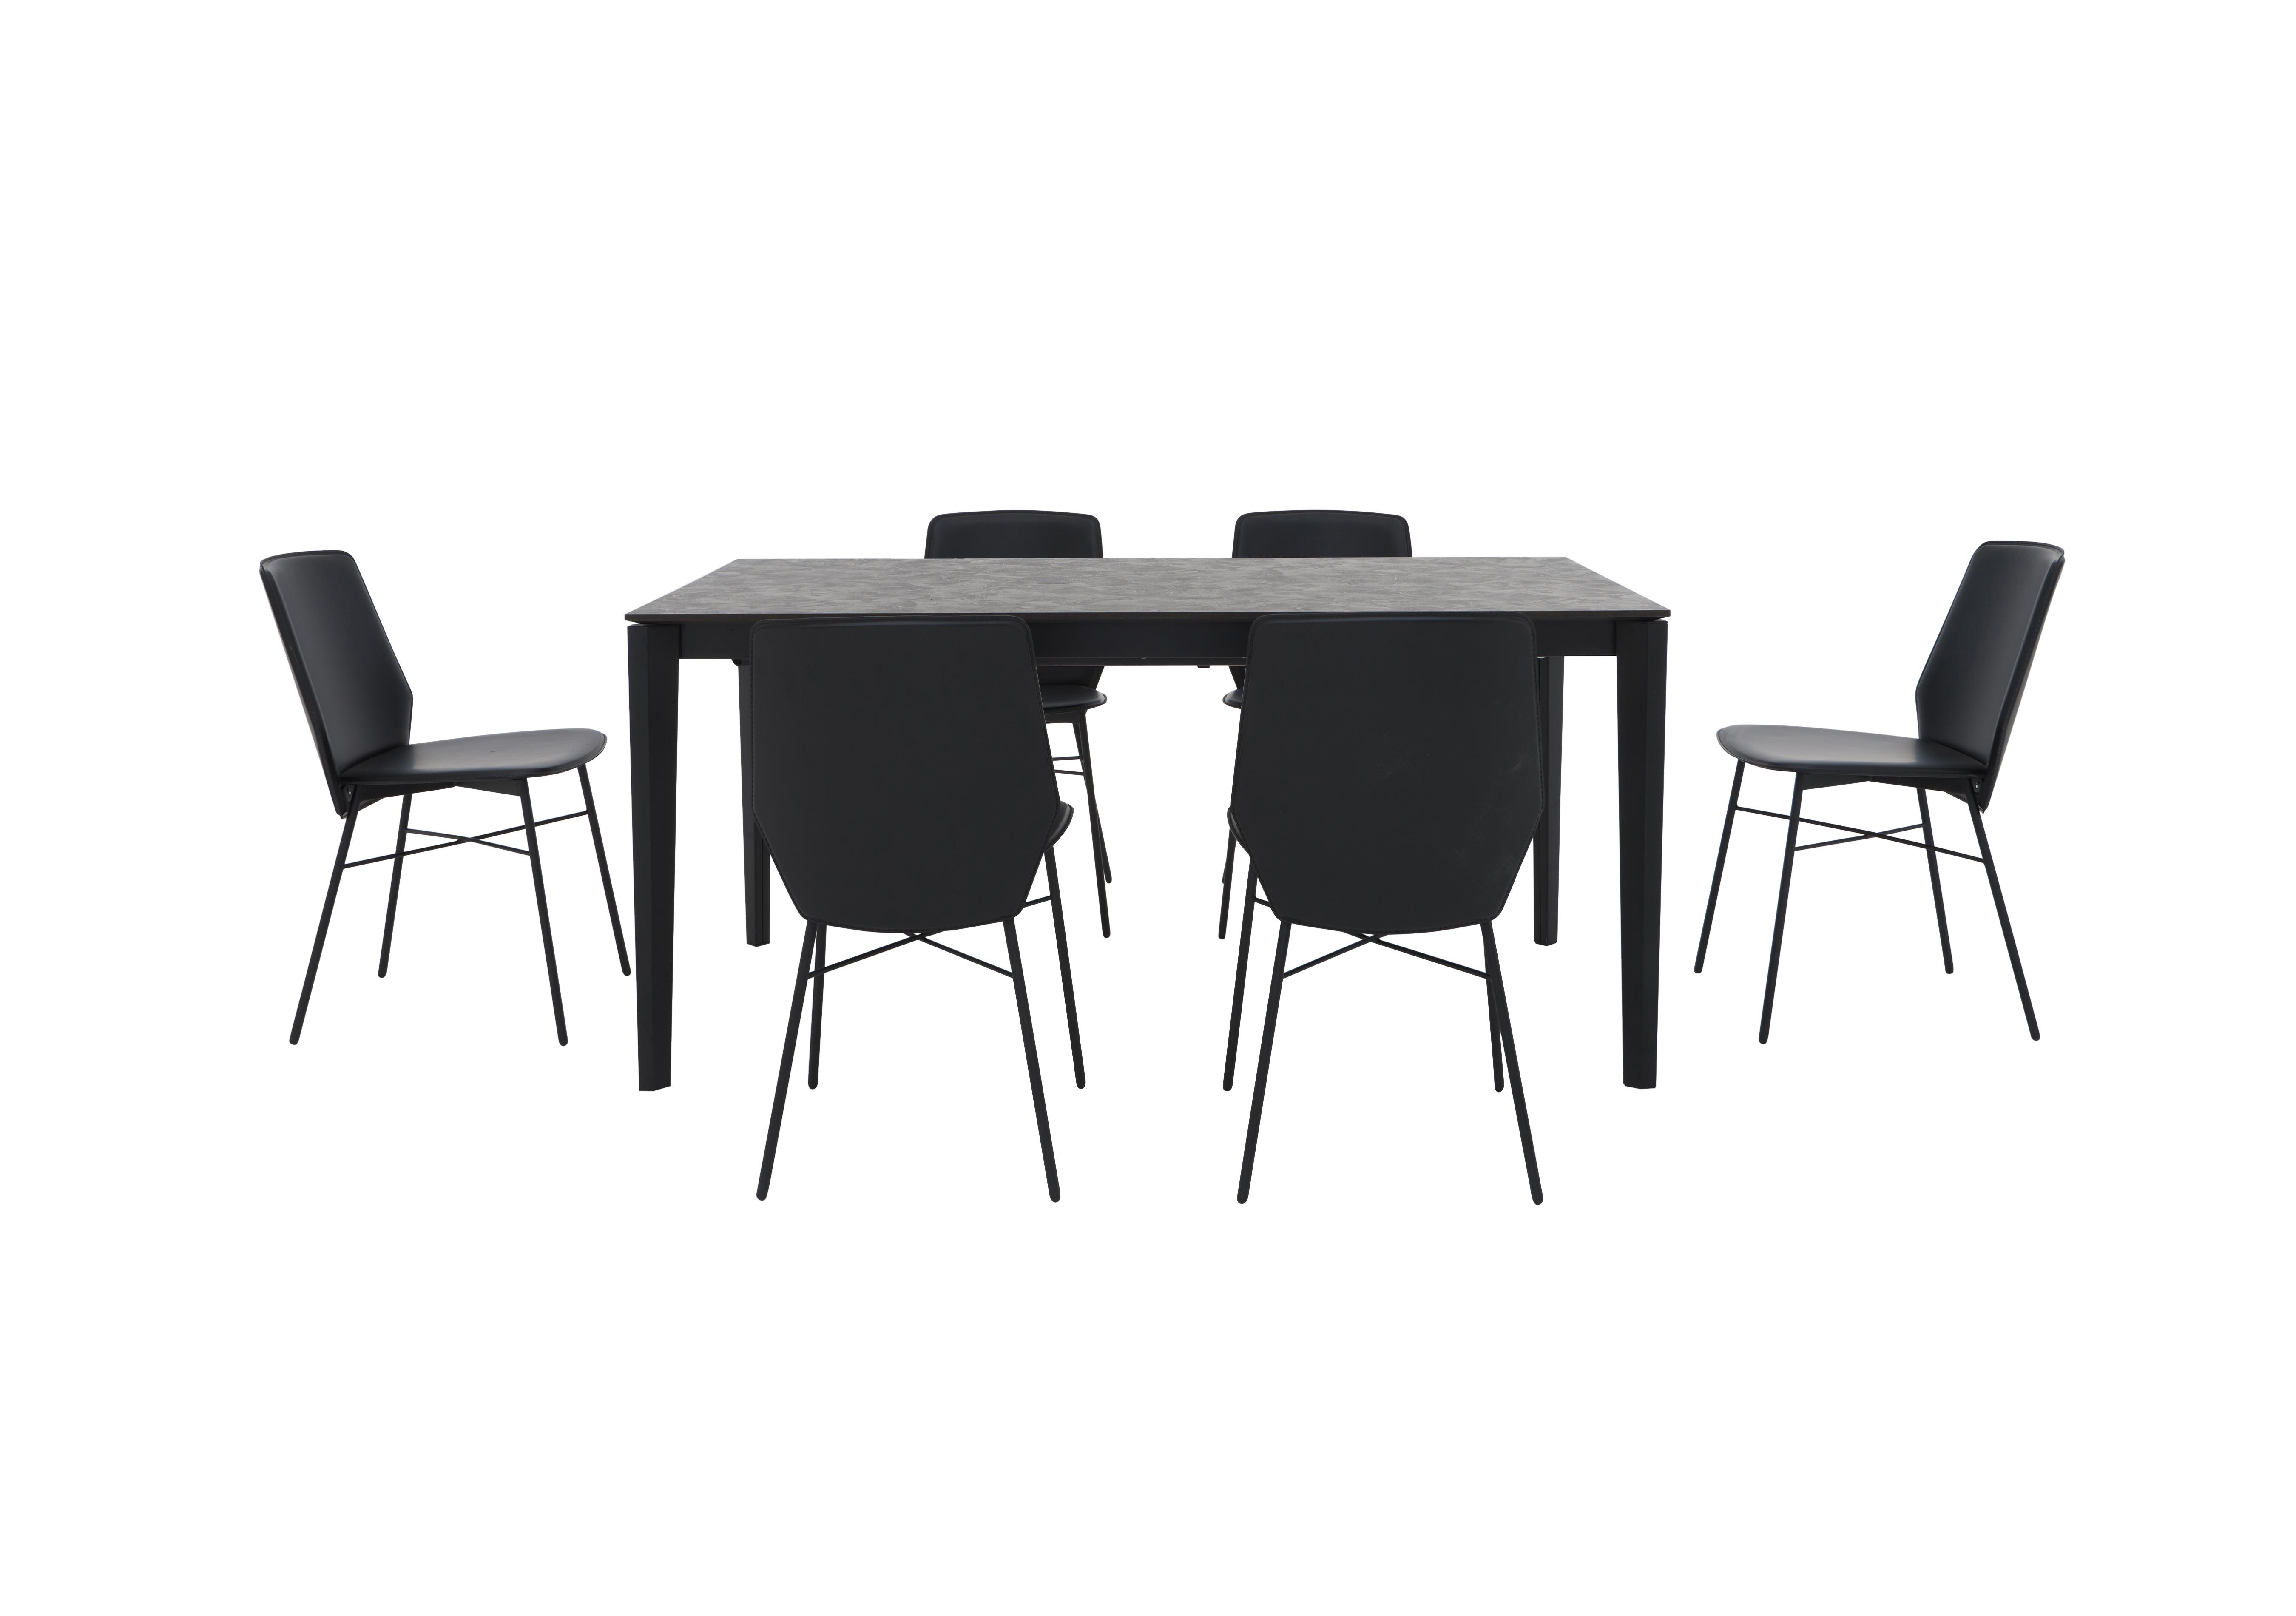 Pentagon Extending Dining Table with Oxide Bronze Top and 6 Sibilla Dining Chairs in Black/Black on Furniture Village